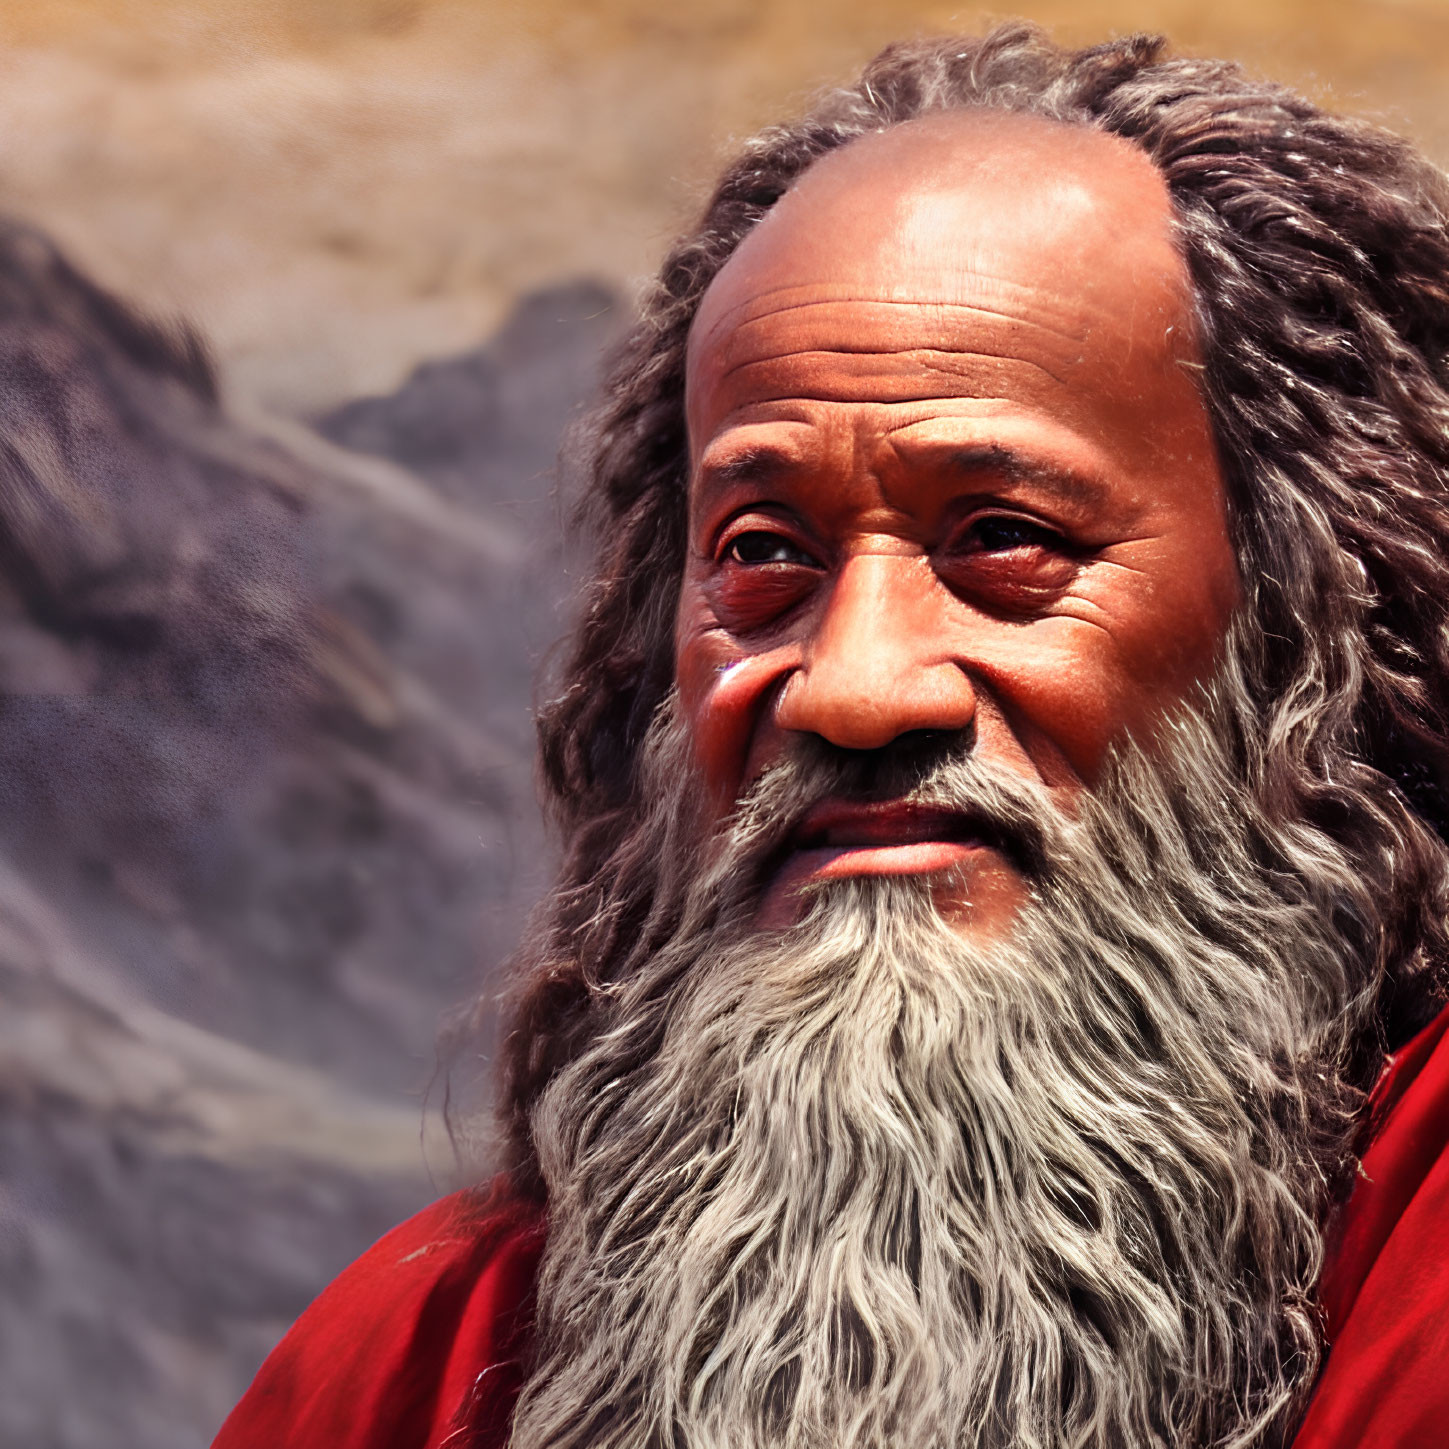 Elder with Long Gray Beard in Red Robe Against Mountainous Background